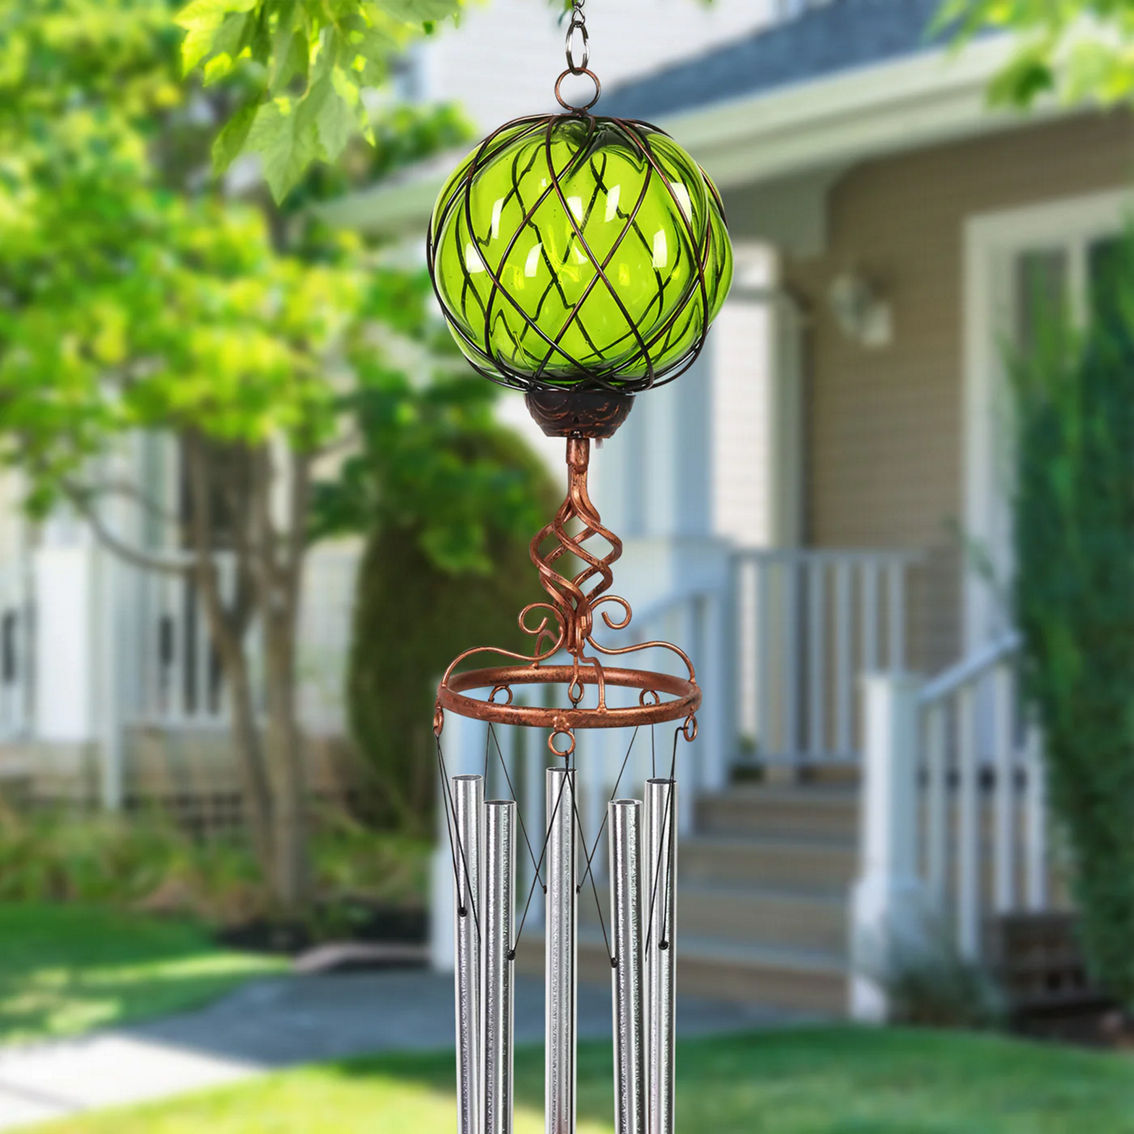 Exhart Solar Caged Wind Chime with Metal Finial - Image 2 of 3